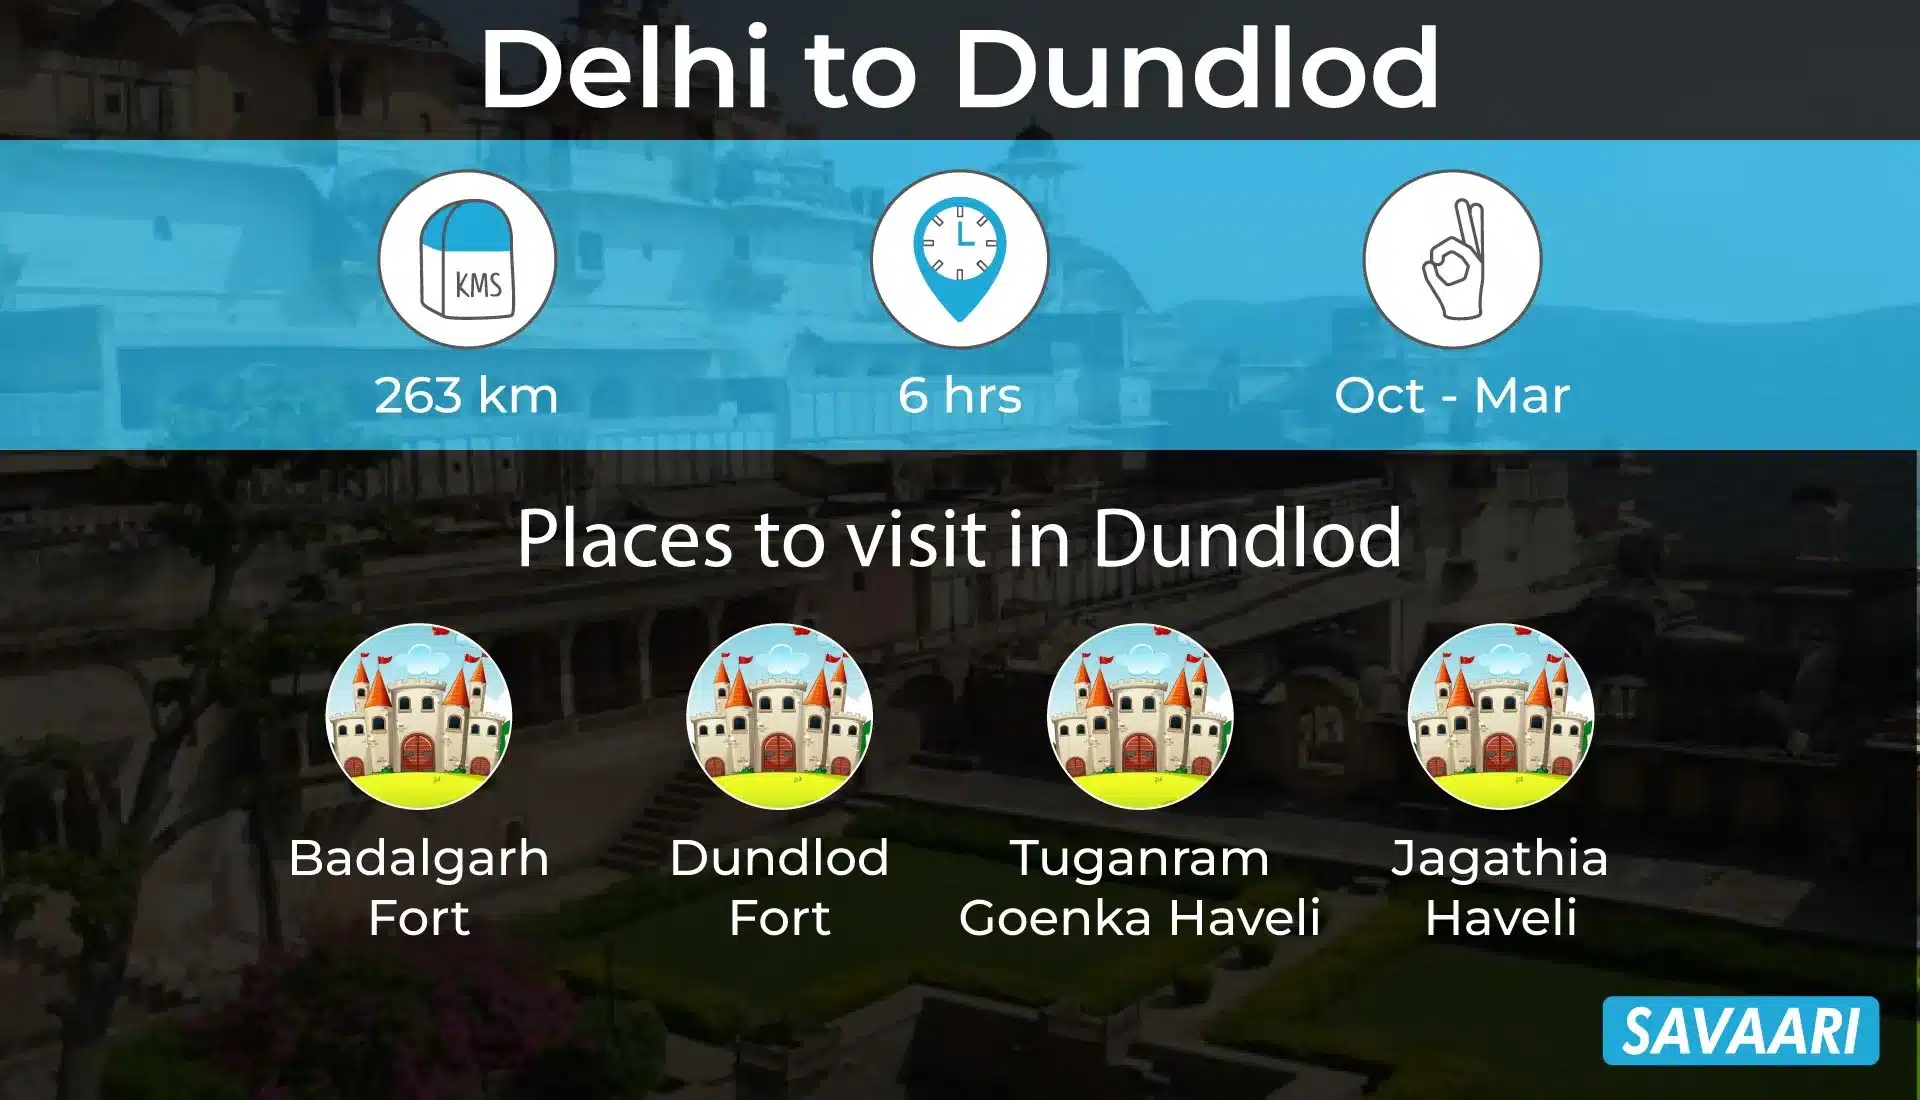 Delhi to Dundlod by road